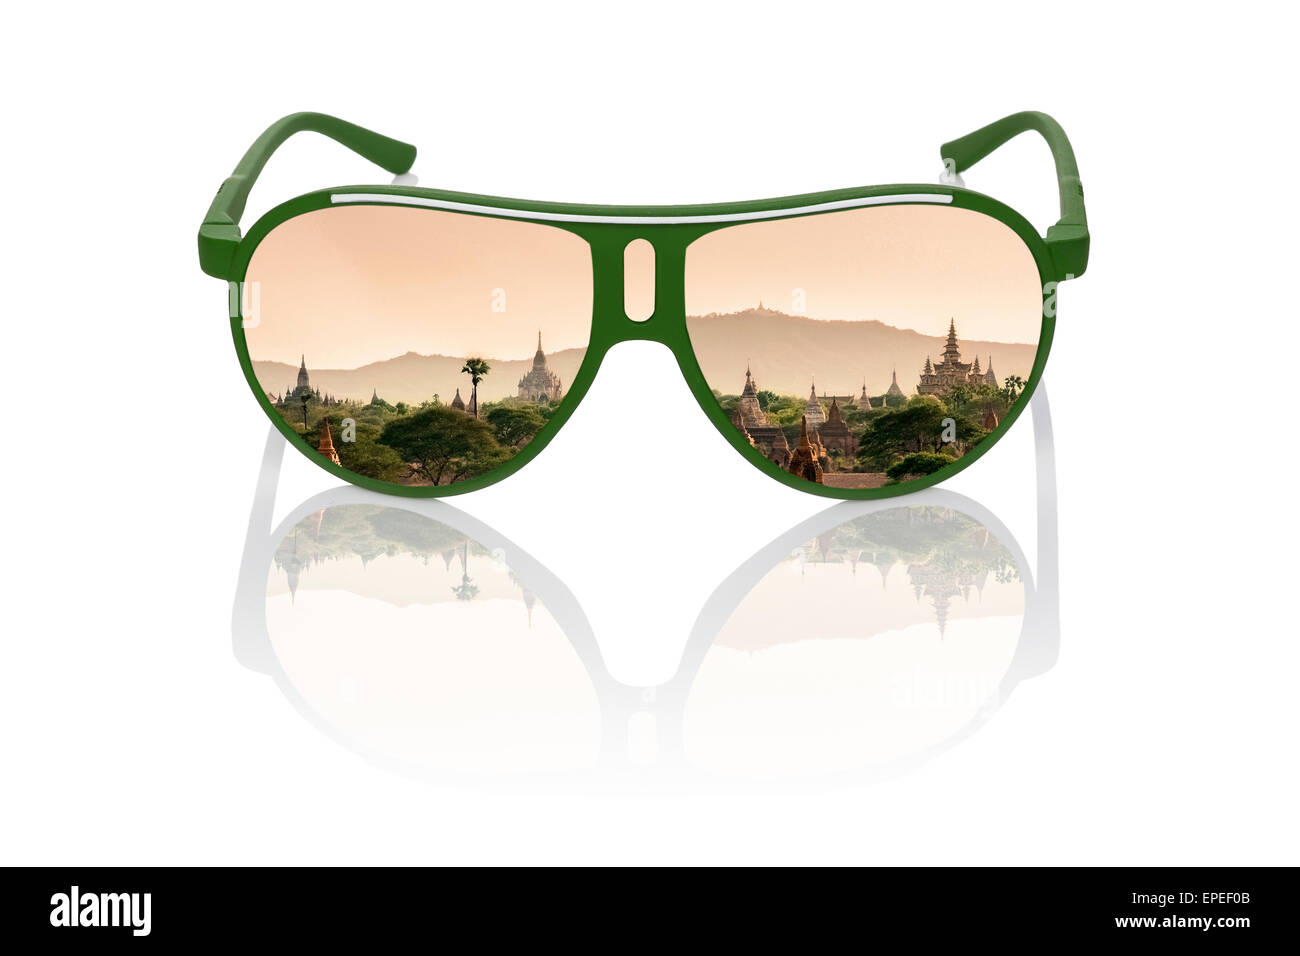 Travel dreams. Antique bagan temples at sunset reflection in sunglasses isolated on white background. Asian travelling. Stock Photo